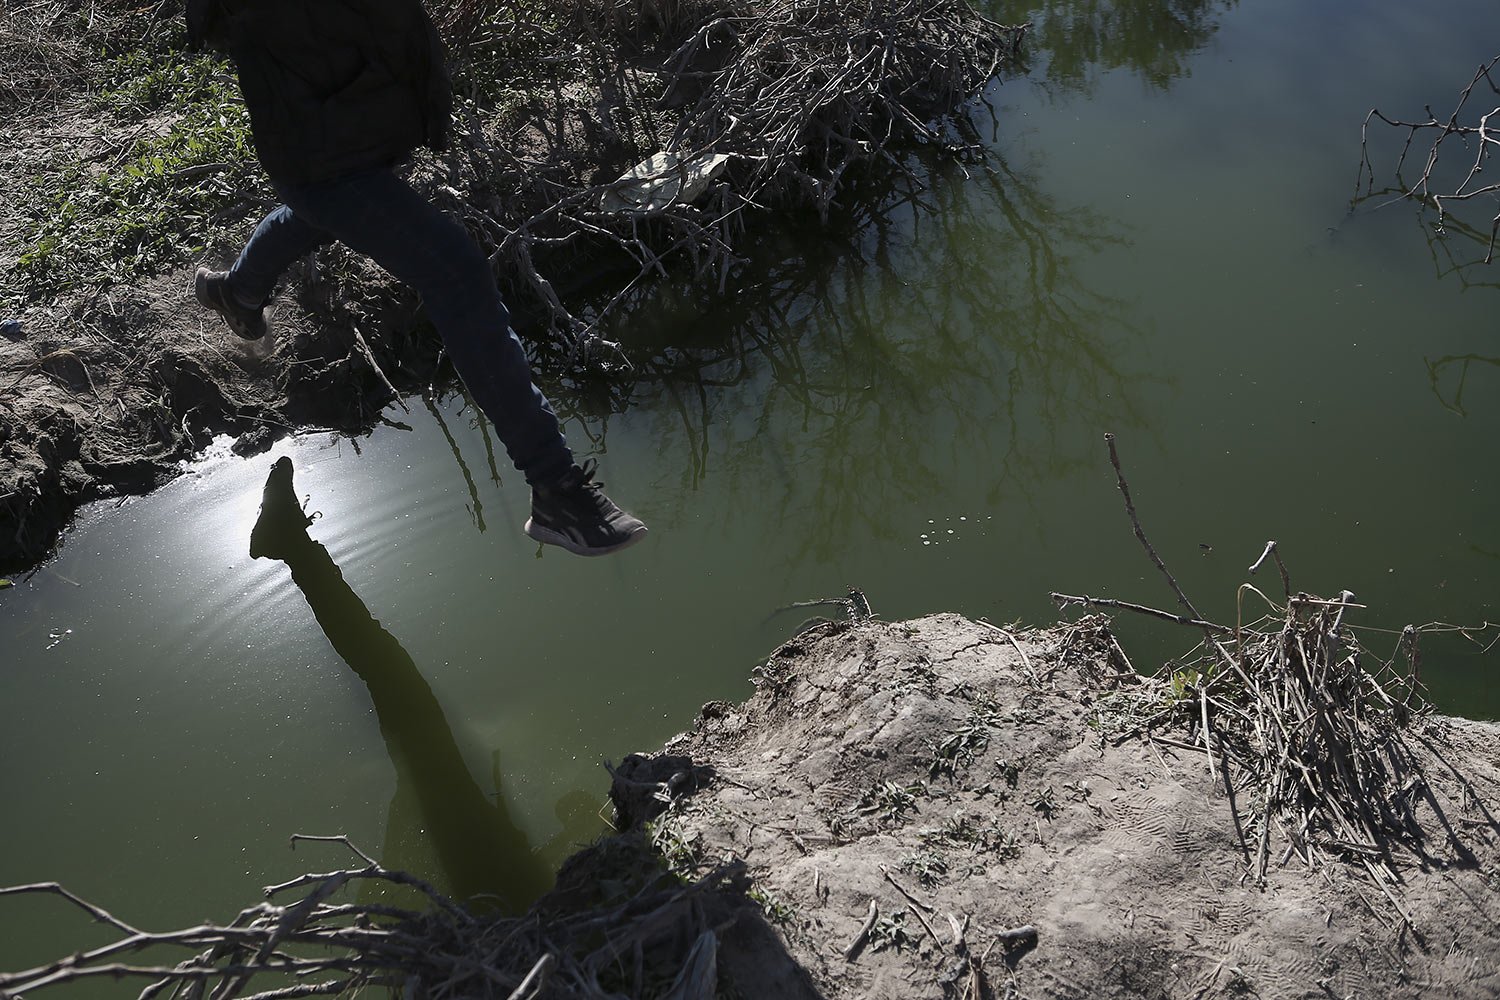  A migrant jumps over the Rio Grande river into the United States from Ciudad Juarez, Mexico, March 29, 2023, a day after dozens of migrants died in a fire at a migrant detention center in Ciudad Juarez. (AP Photo/Christian Chavez) 